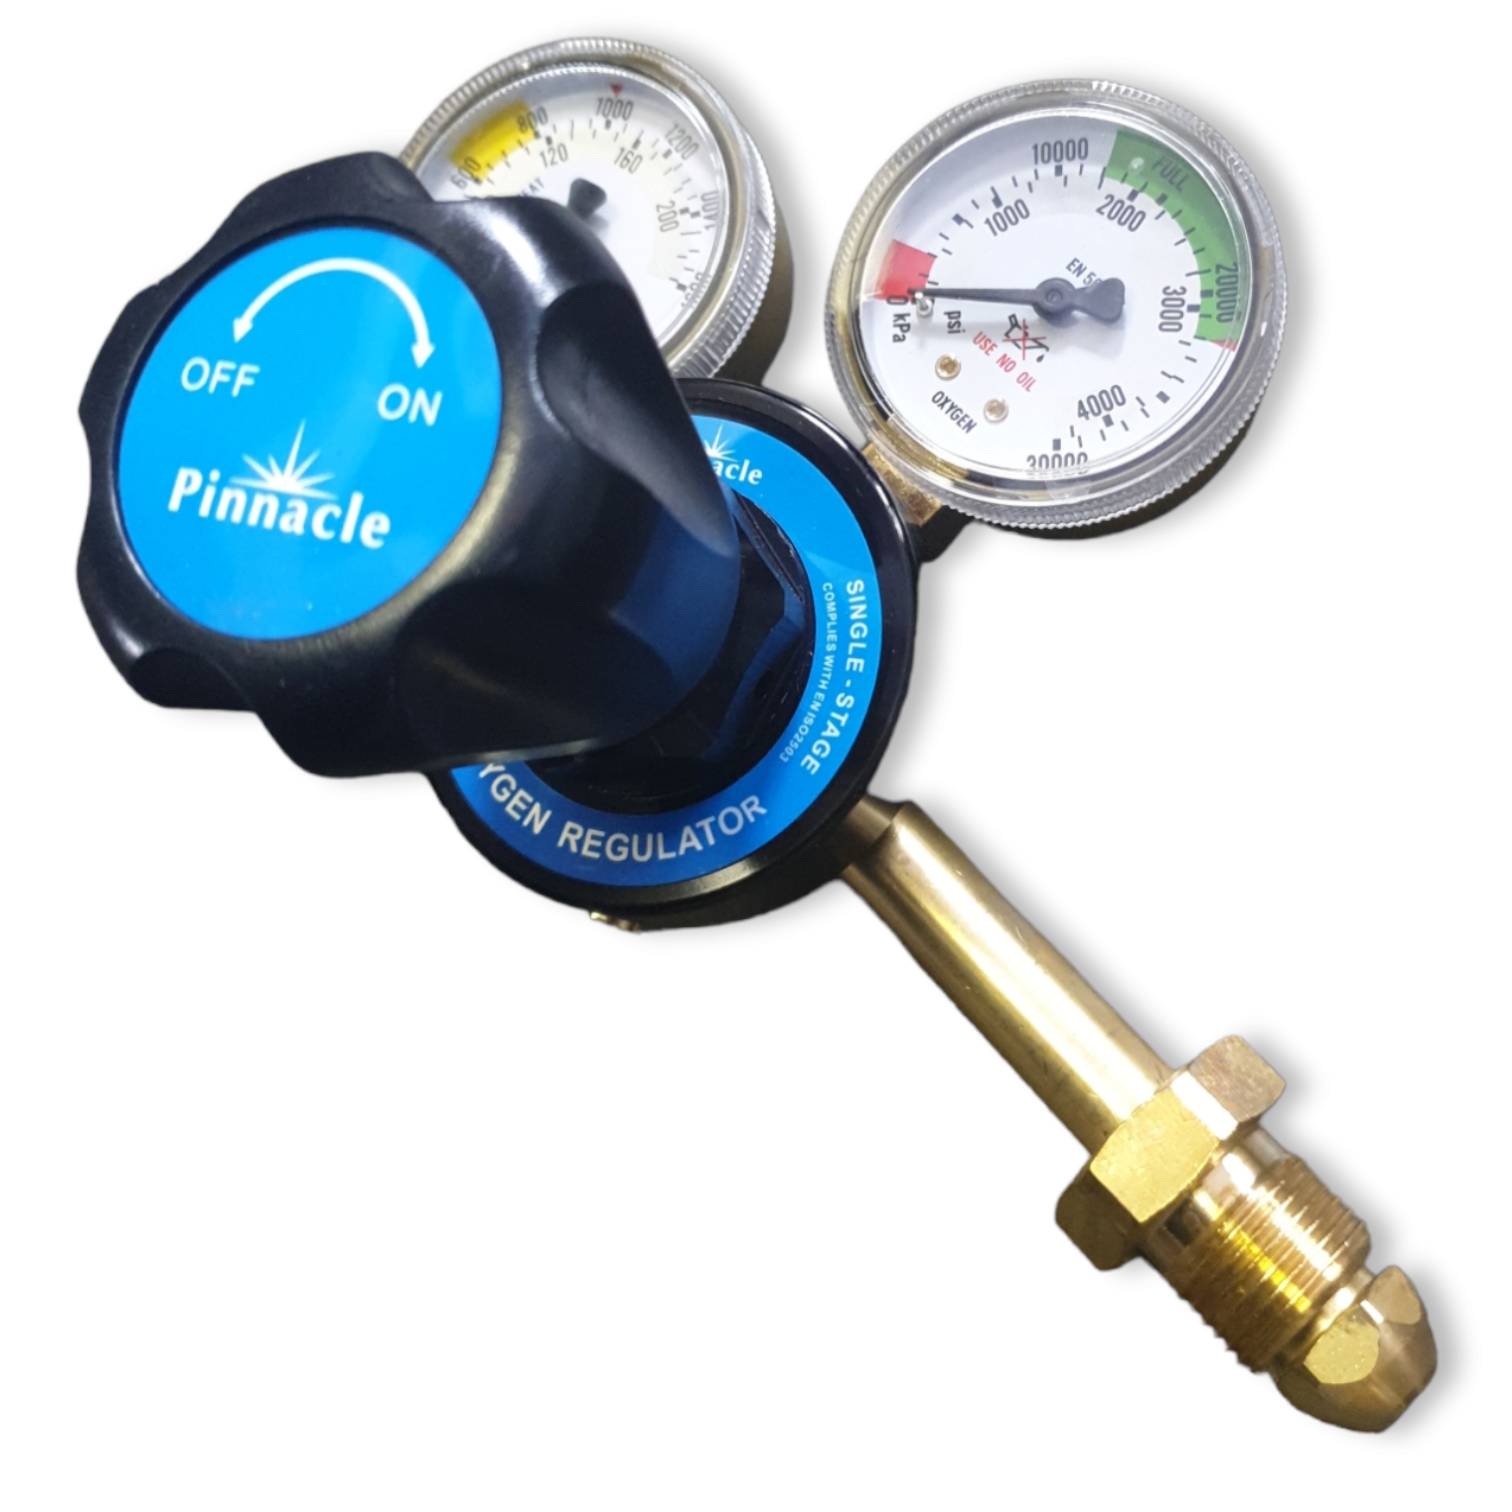 Single Stage Oxygen Regulator for Welding - Pinnacle Precision